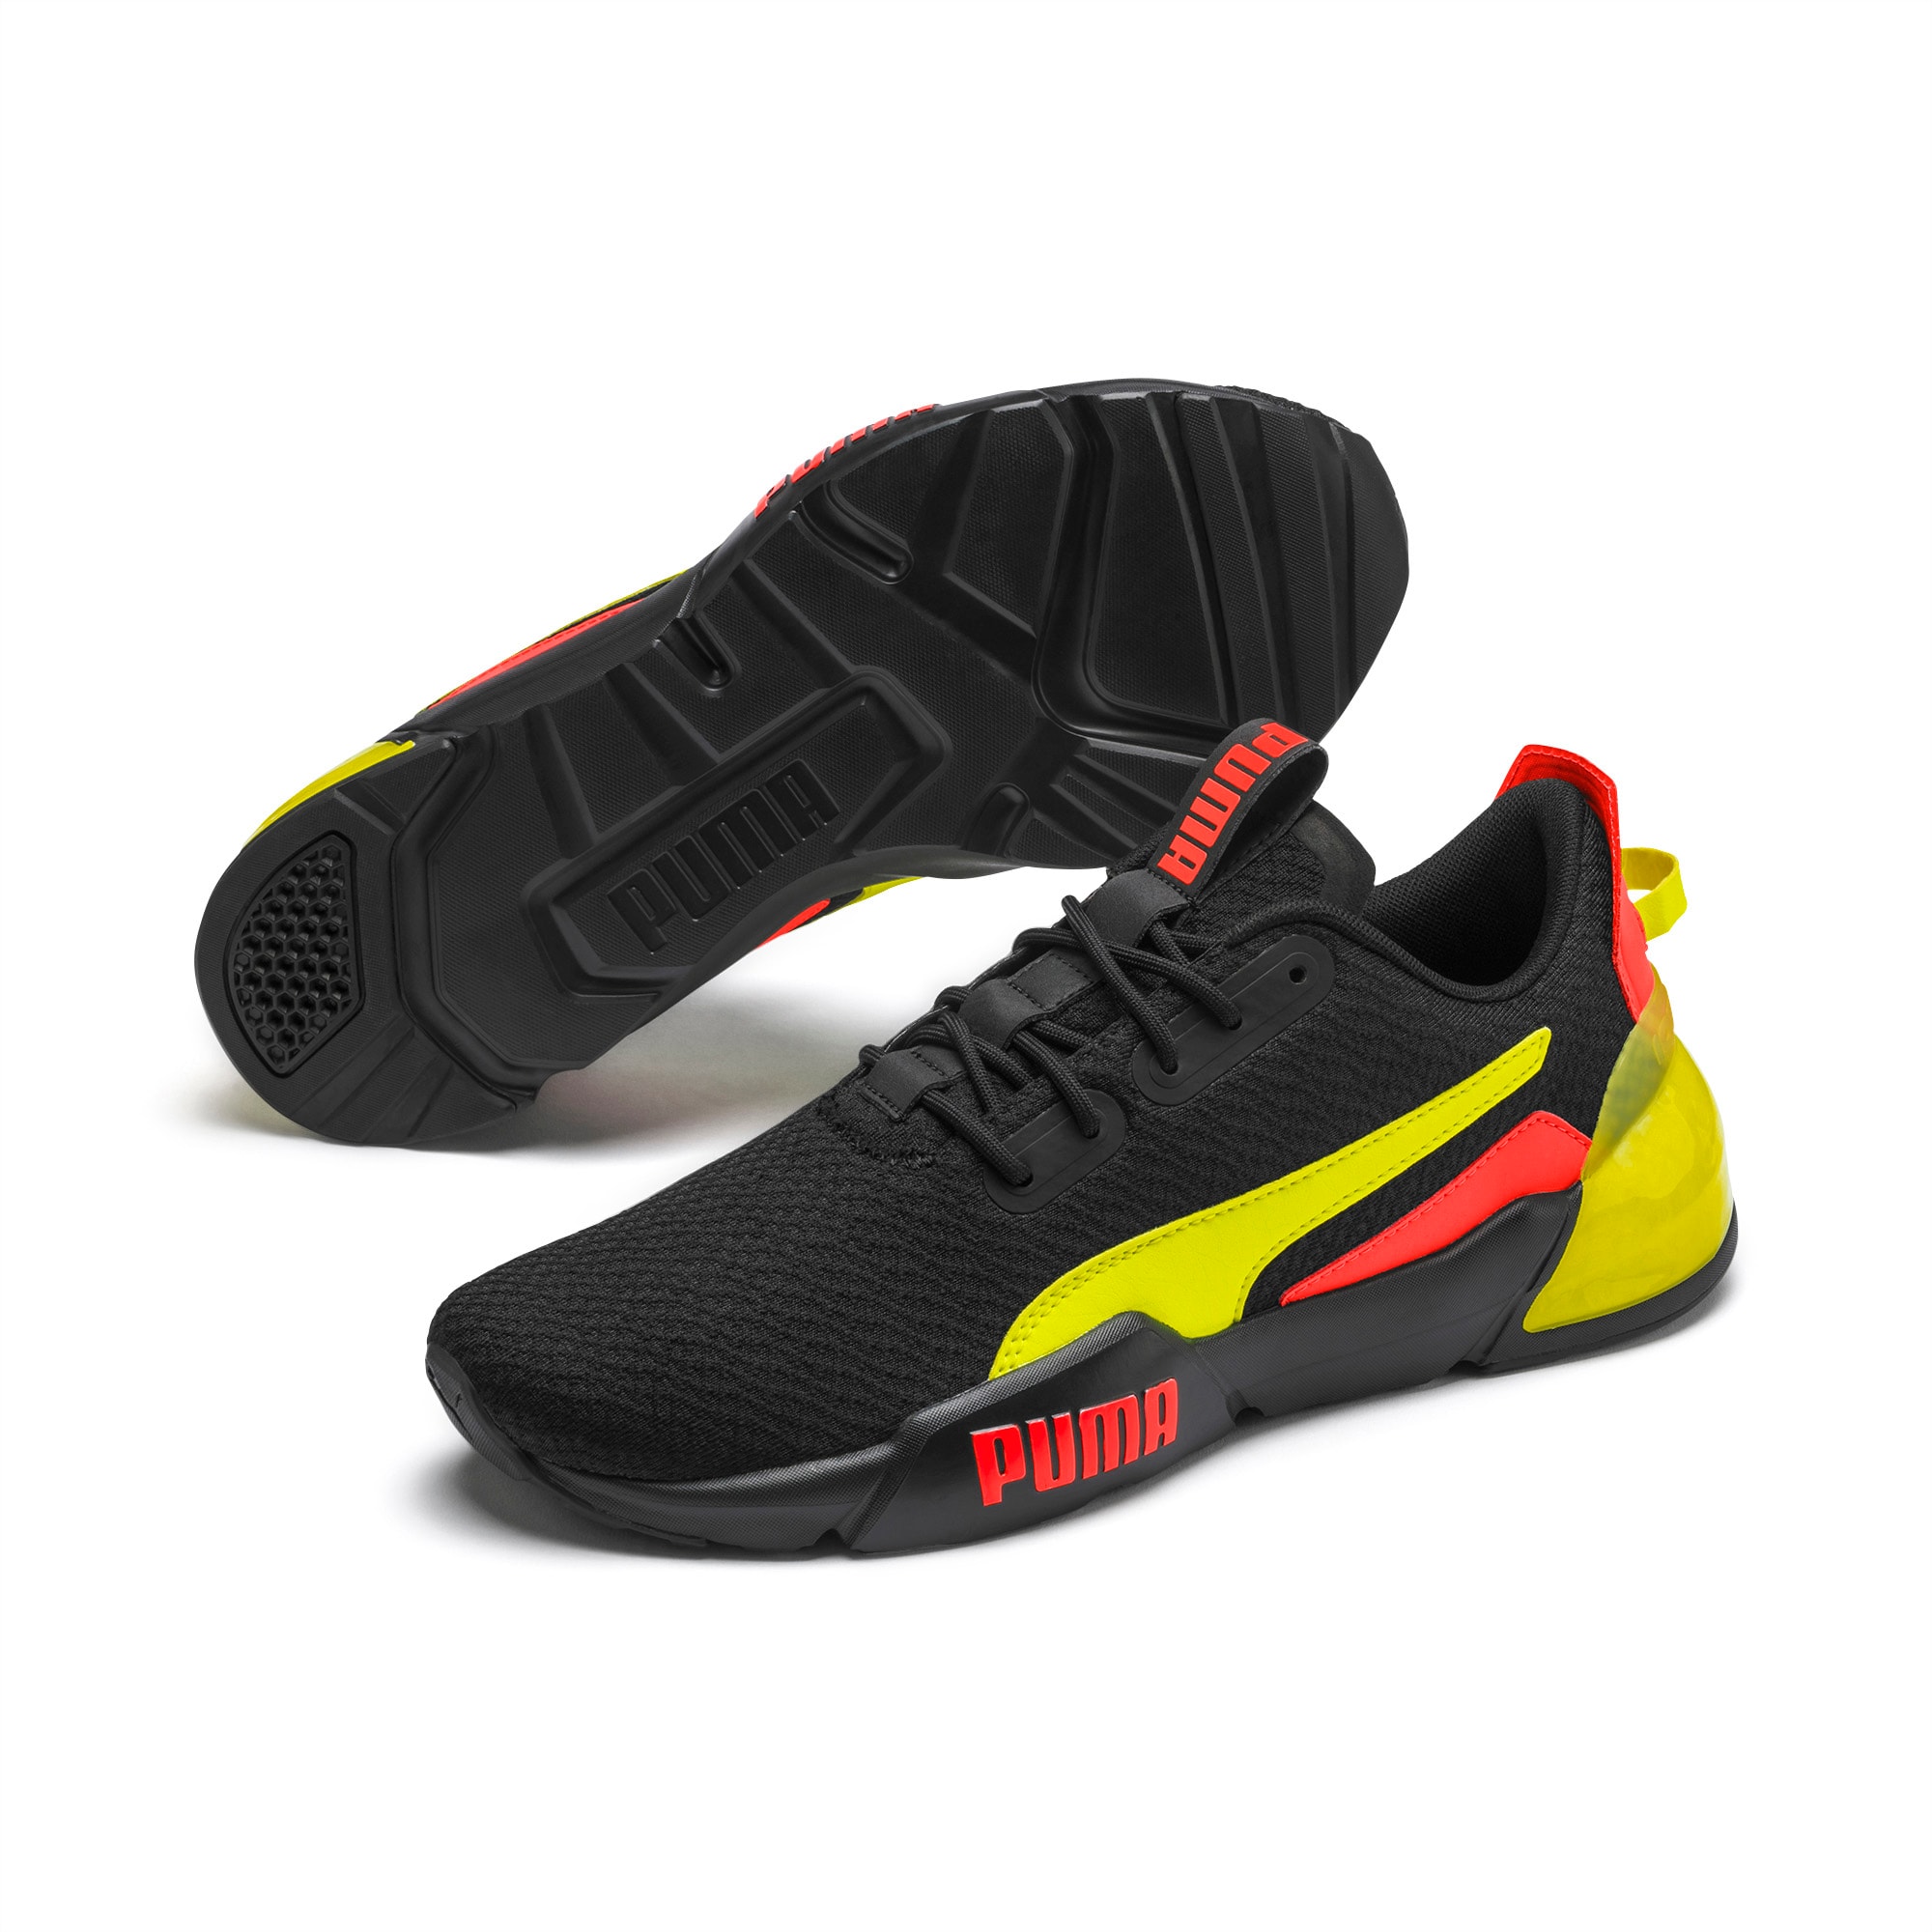 CELL Phase Gloss Men's Training Shoes | PUMA US